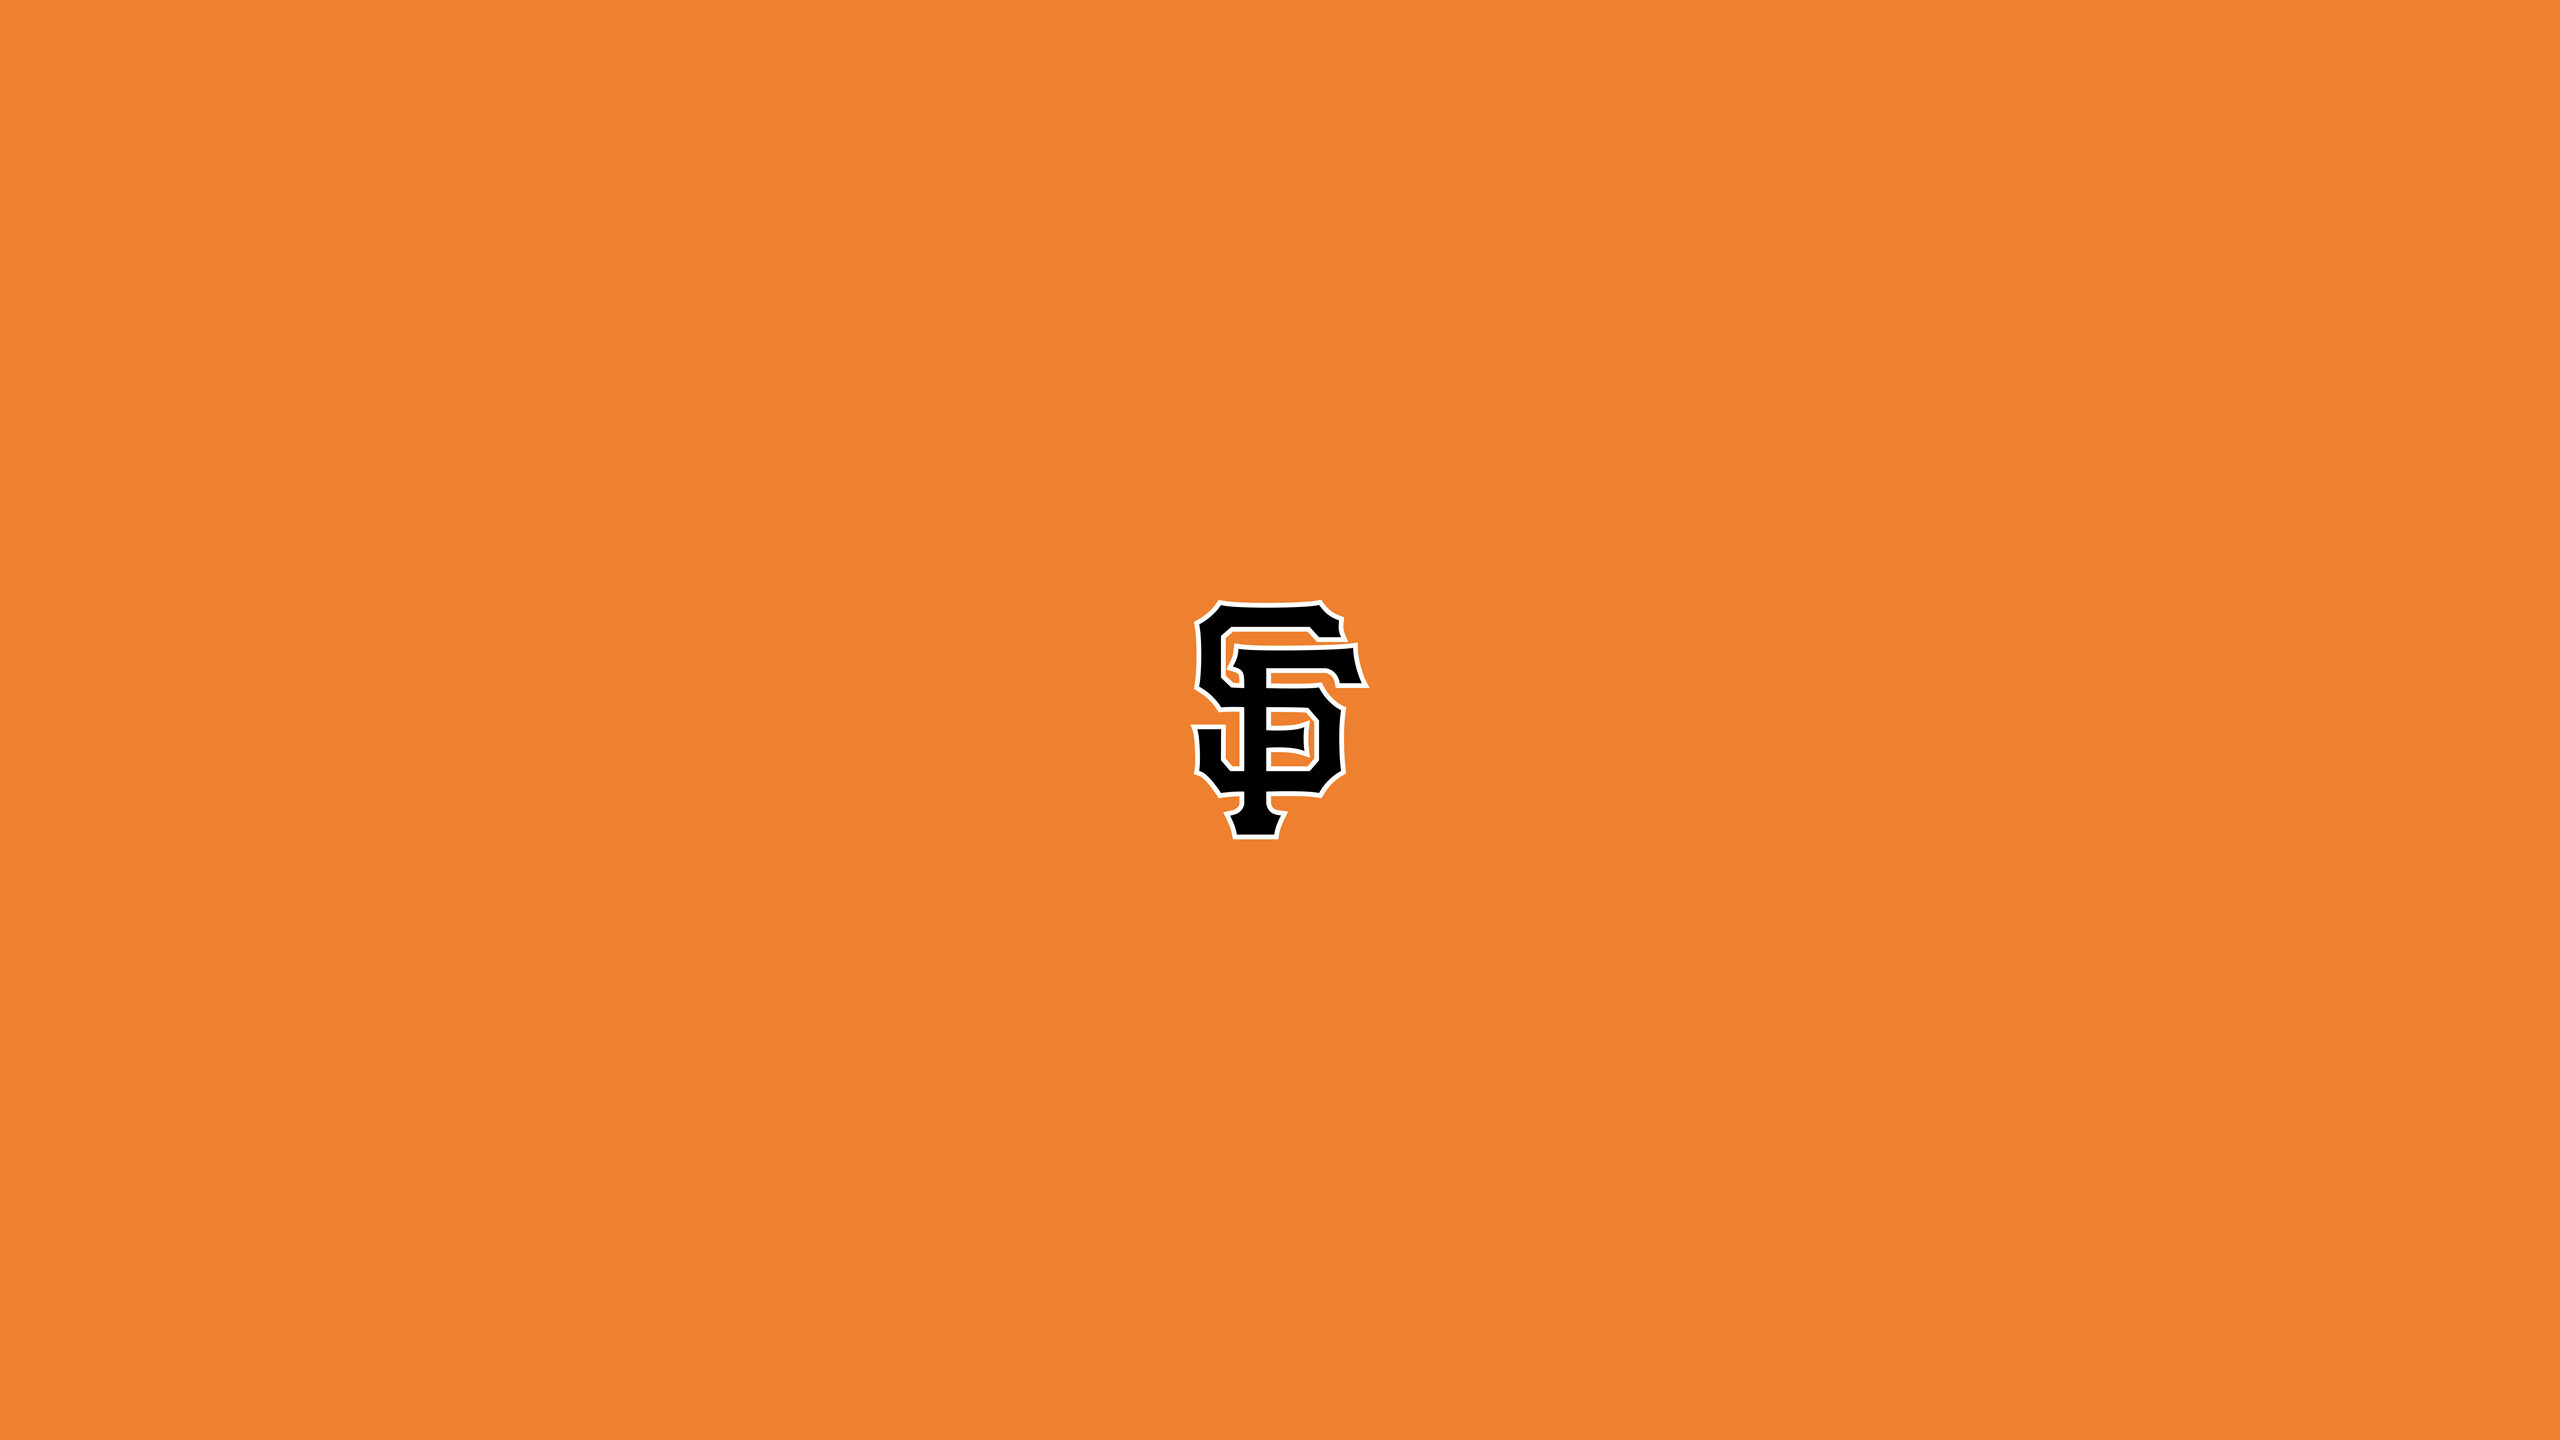 San Francisco Giants: Five-time World Series championships winners, The Baseball Hall of Fame members. 2560x1440 HD Background.